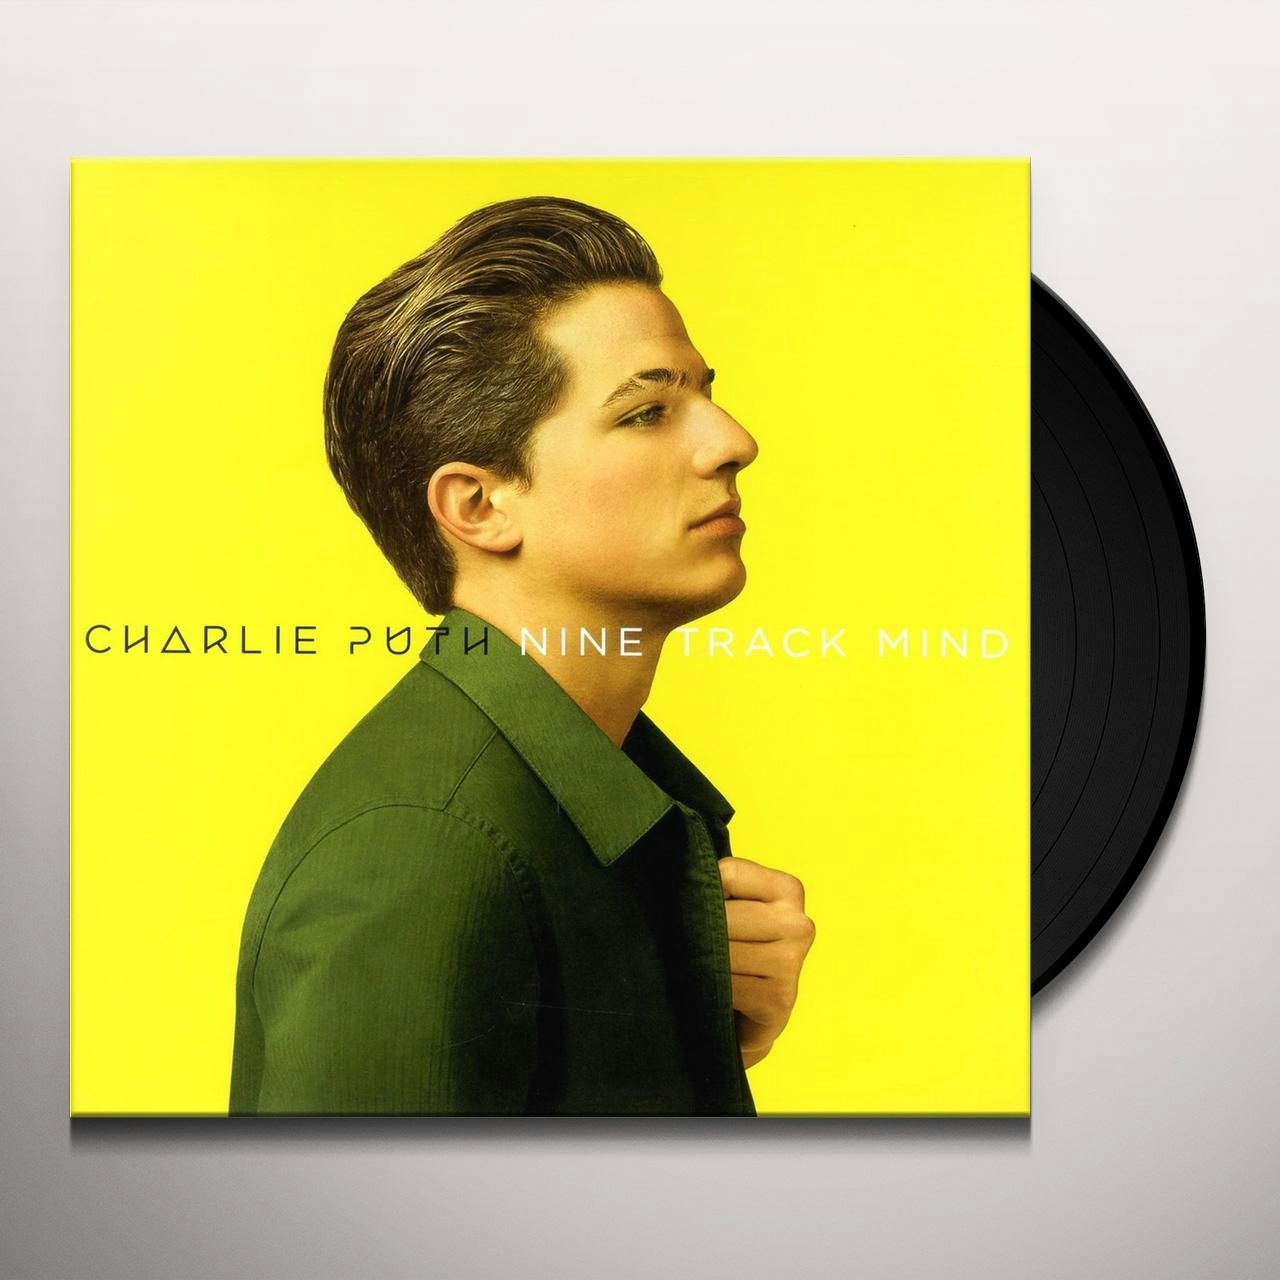 LIMITED EDITION Vinyl Record - Charlie Puth